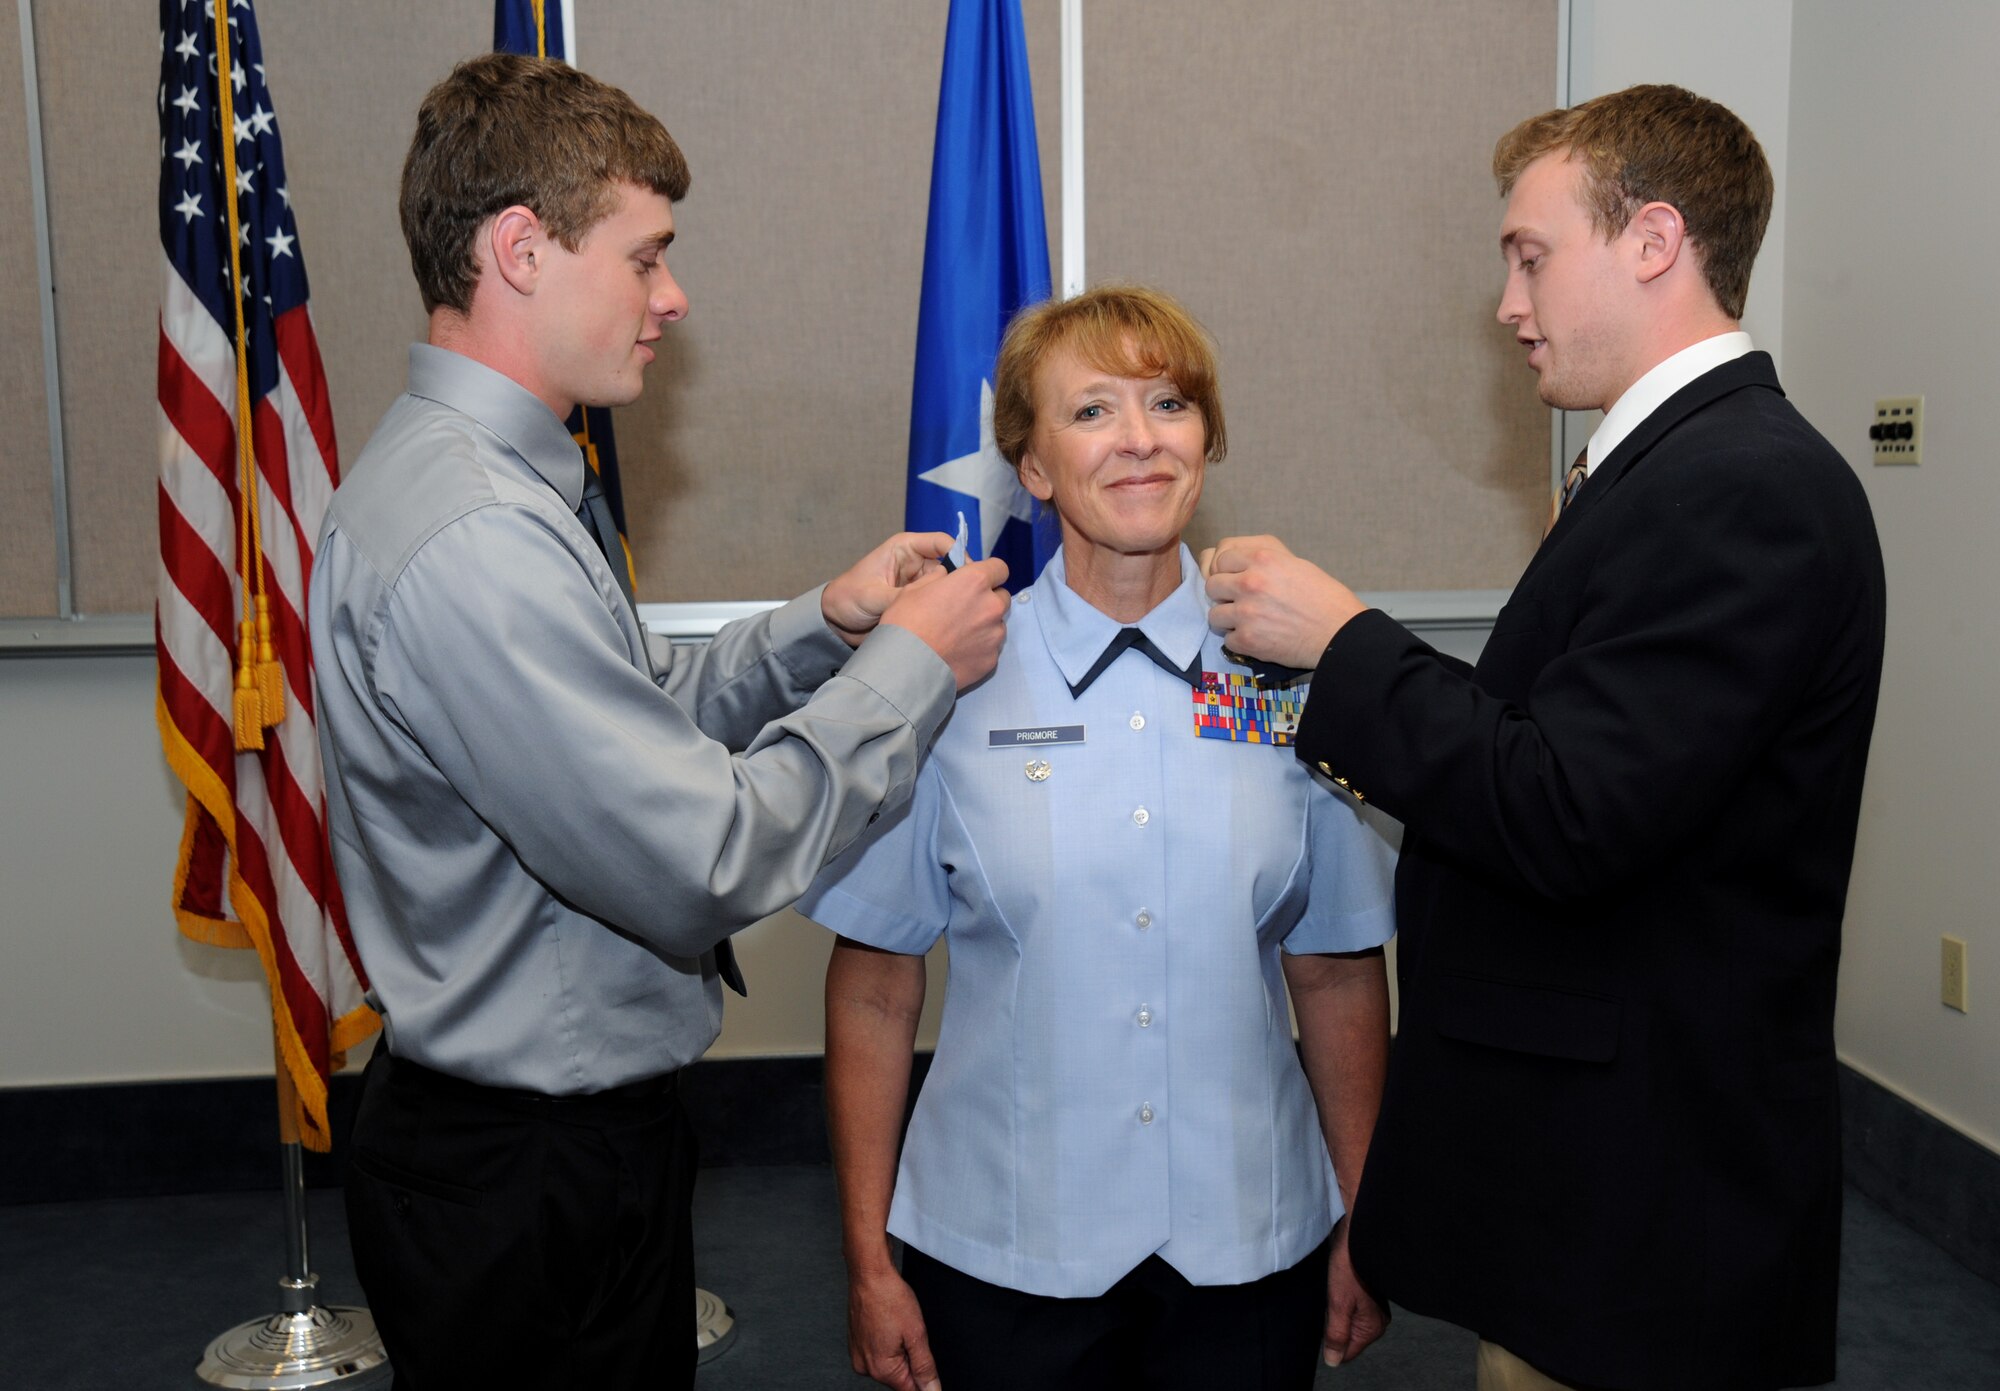 Lt. Col. Donna Prigmore is promoted to the rank of Colonel with the assistance of her two sons, Brian and Nathan Prigmore, during her promotion ceremony held at the Portland Air National Guard Base, Ore., Aug. 3, 2014. (U.S. Air National Guard photo by Tech. Sgt. John Hughel, 142nd Fighter Wing Public Affairs/Released)